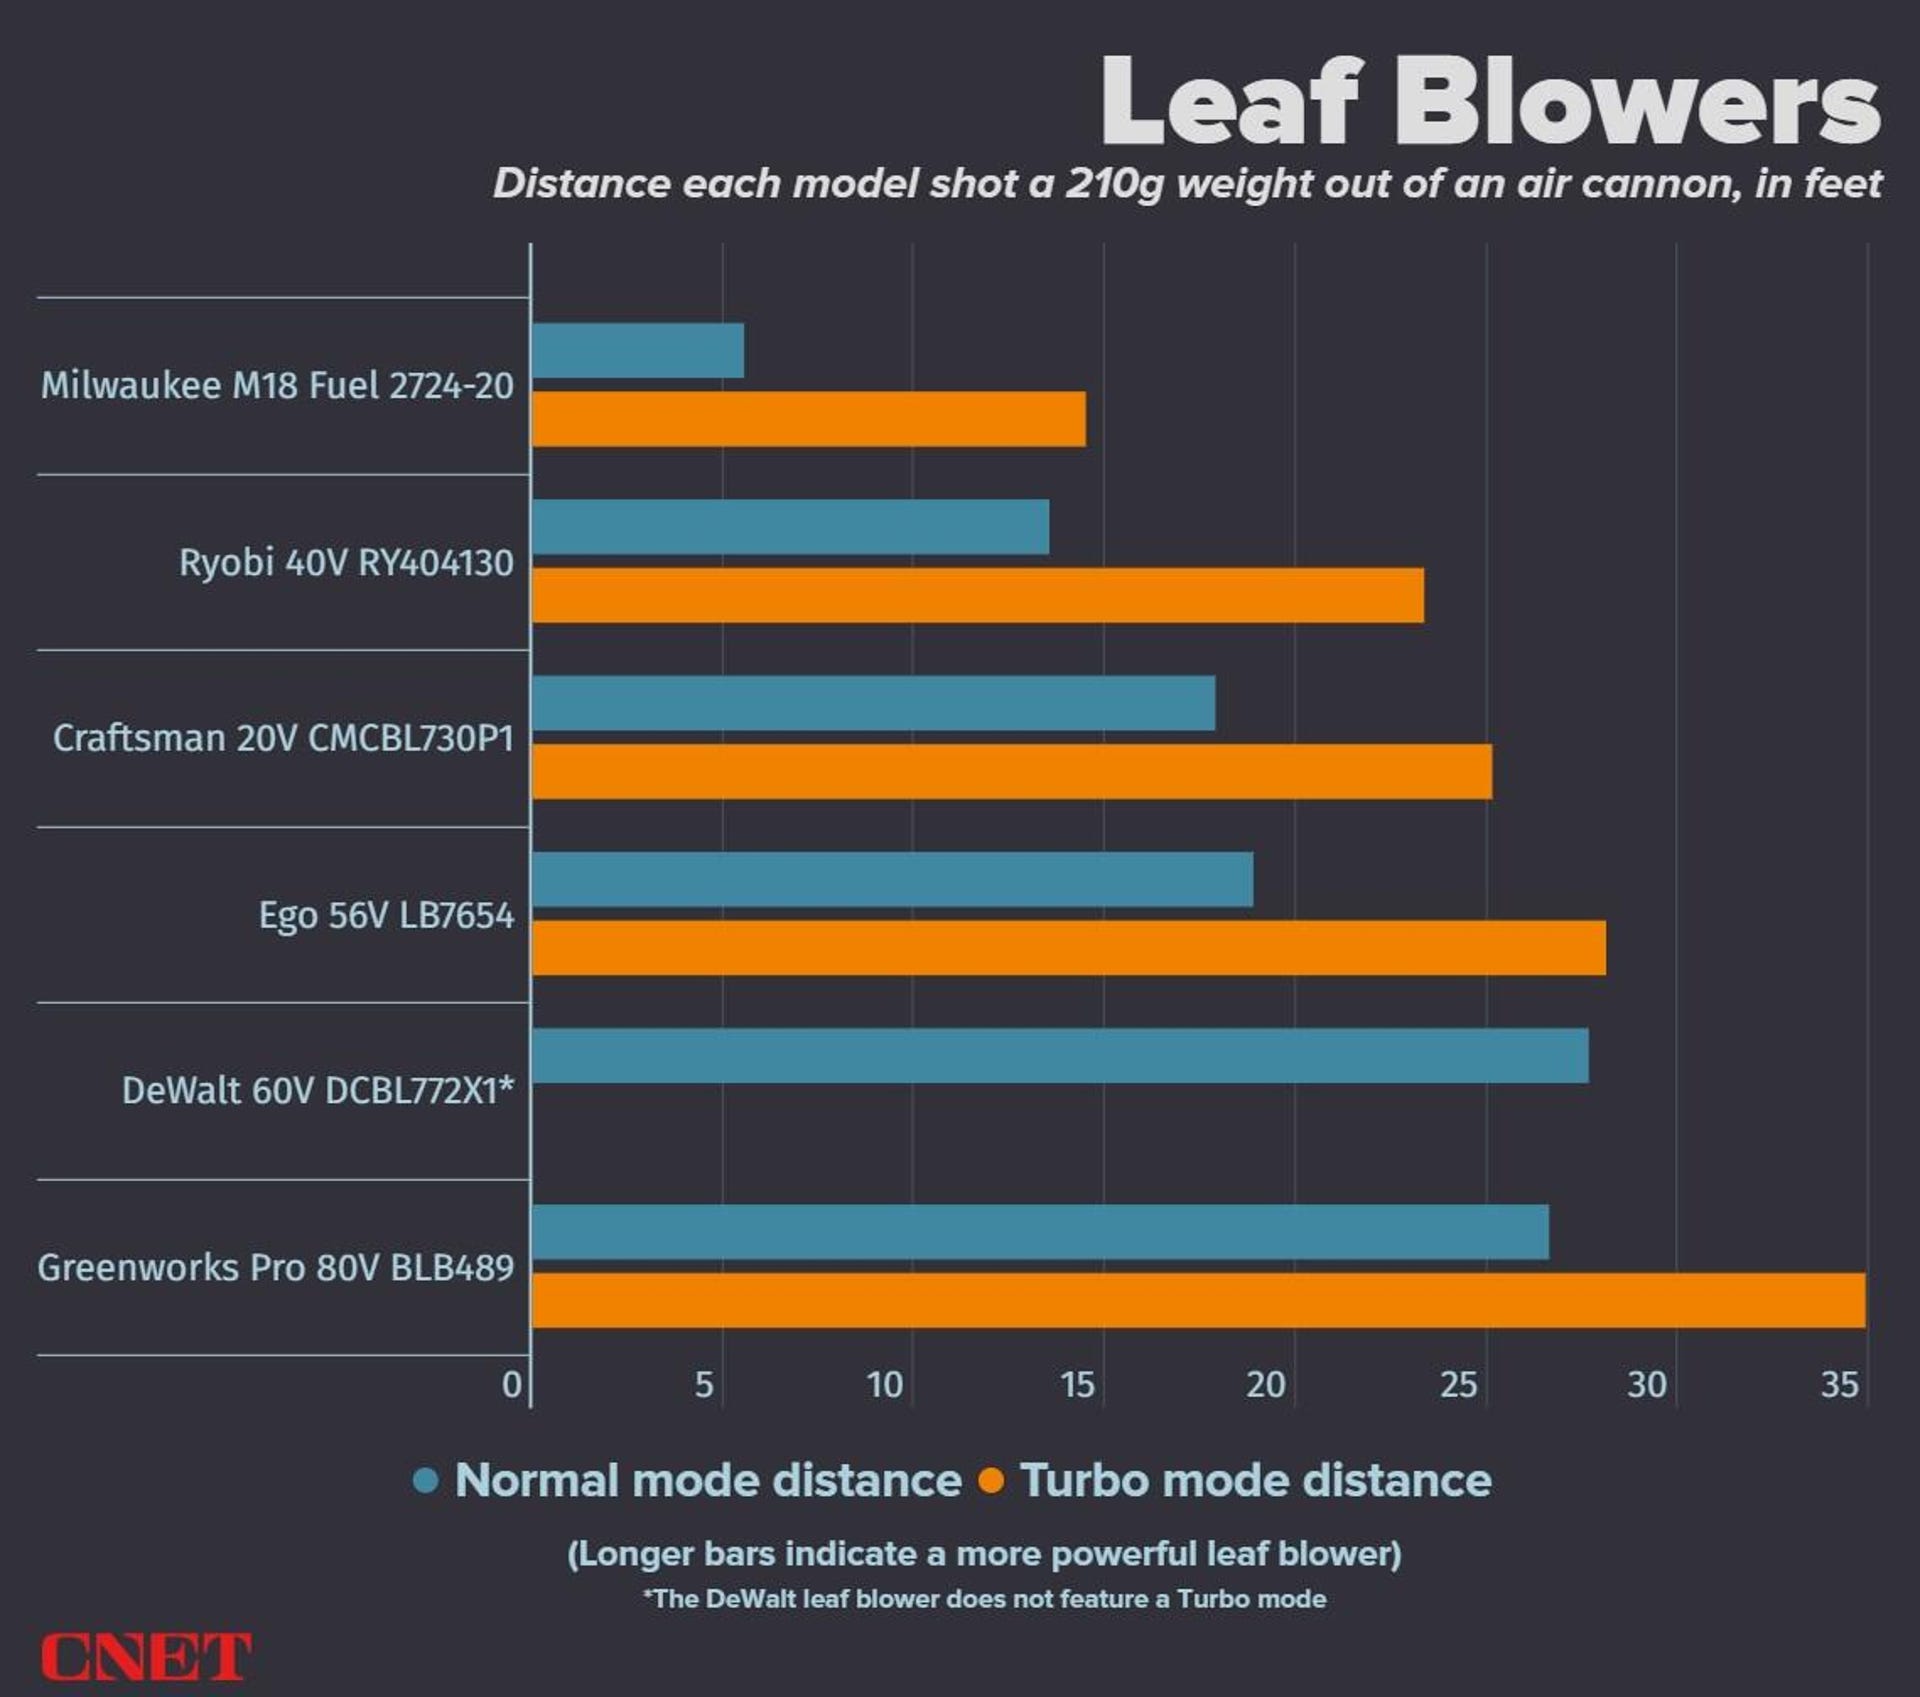 A double bar graph shows the distance, in feet, that each of the six leaf blowers we tested shot a 210g weight through a custom-built air cannon, both in each blower's normal mode and, if it offered one, its turbo mode as well. The Greenworks Pro 80v model was the clear winner here, shooting our weight more than 35 feet in turbo mode. No other leaf blower, turbo mode or otherwise, was able to shoot farther than 28 feet.